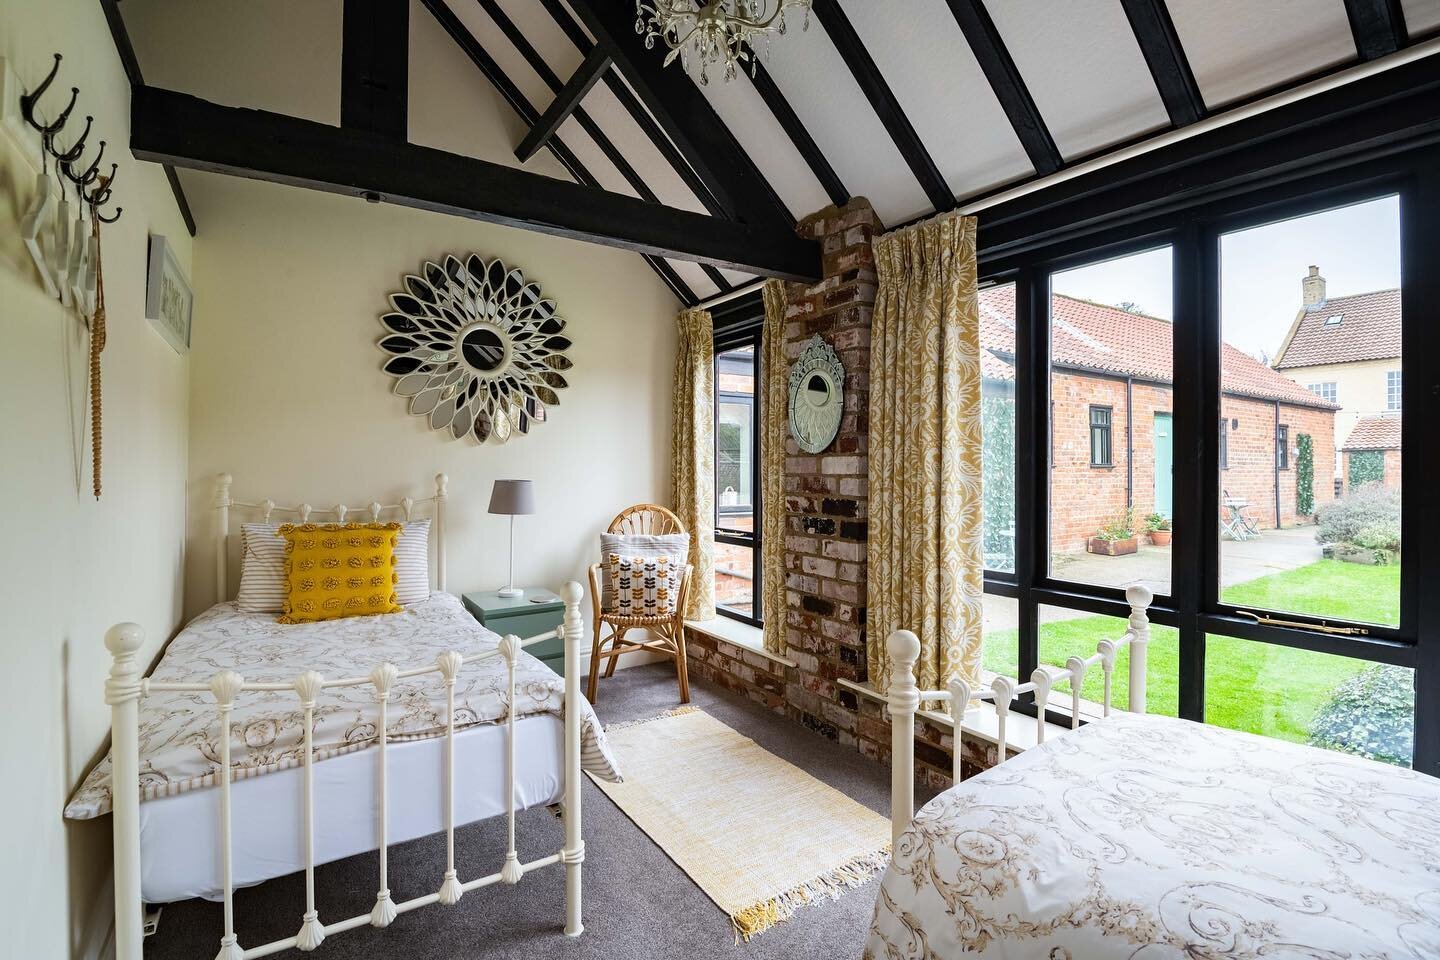 The lovely twin bedroom in Cherry Cottage 🏡⁠
⁠
⁠
⁠
⁠
#twinbedroom #interiordesign #ukholiday #uktravel #holidaycottage #countryside #ruralretreat #petfriendlyholiday #welcometoyorkshire #uniquehomestays ⁠